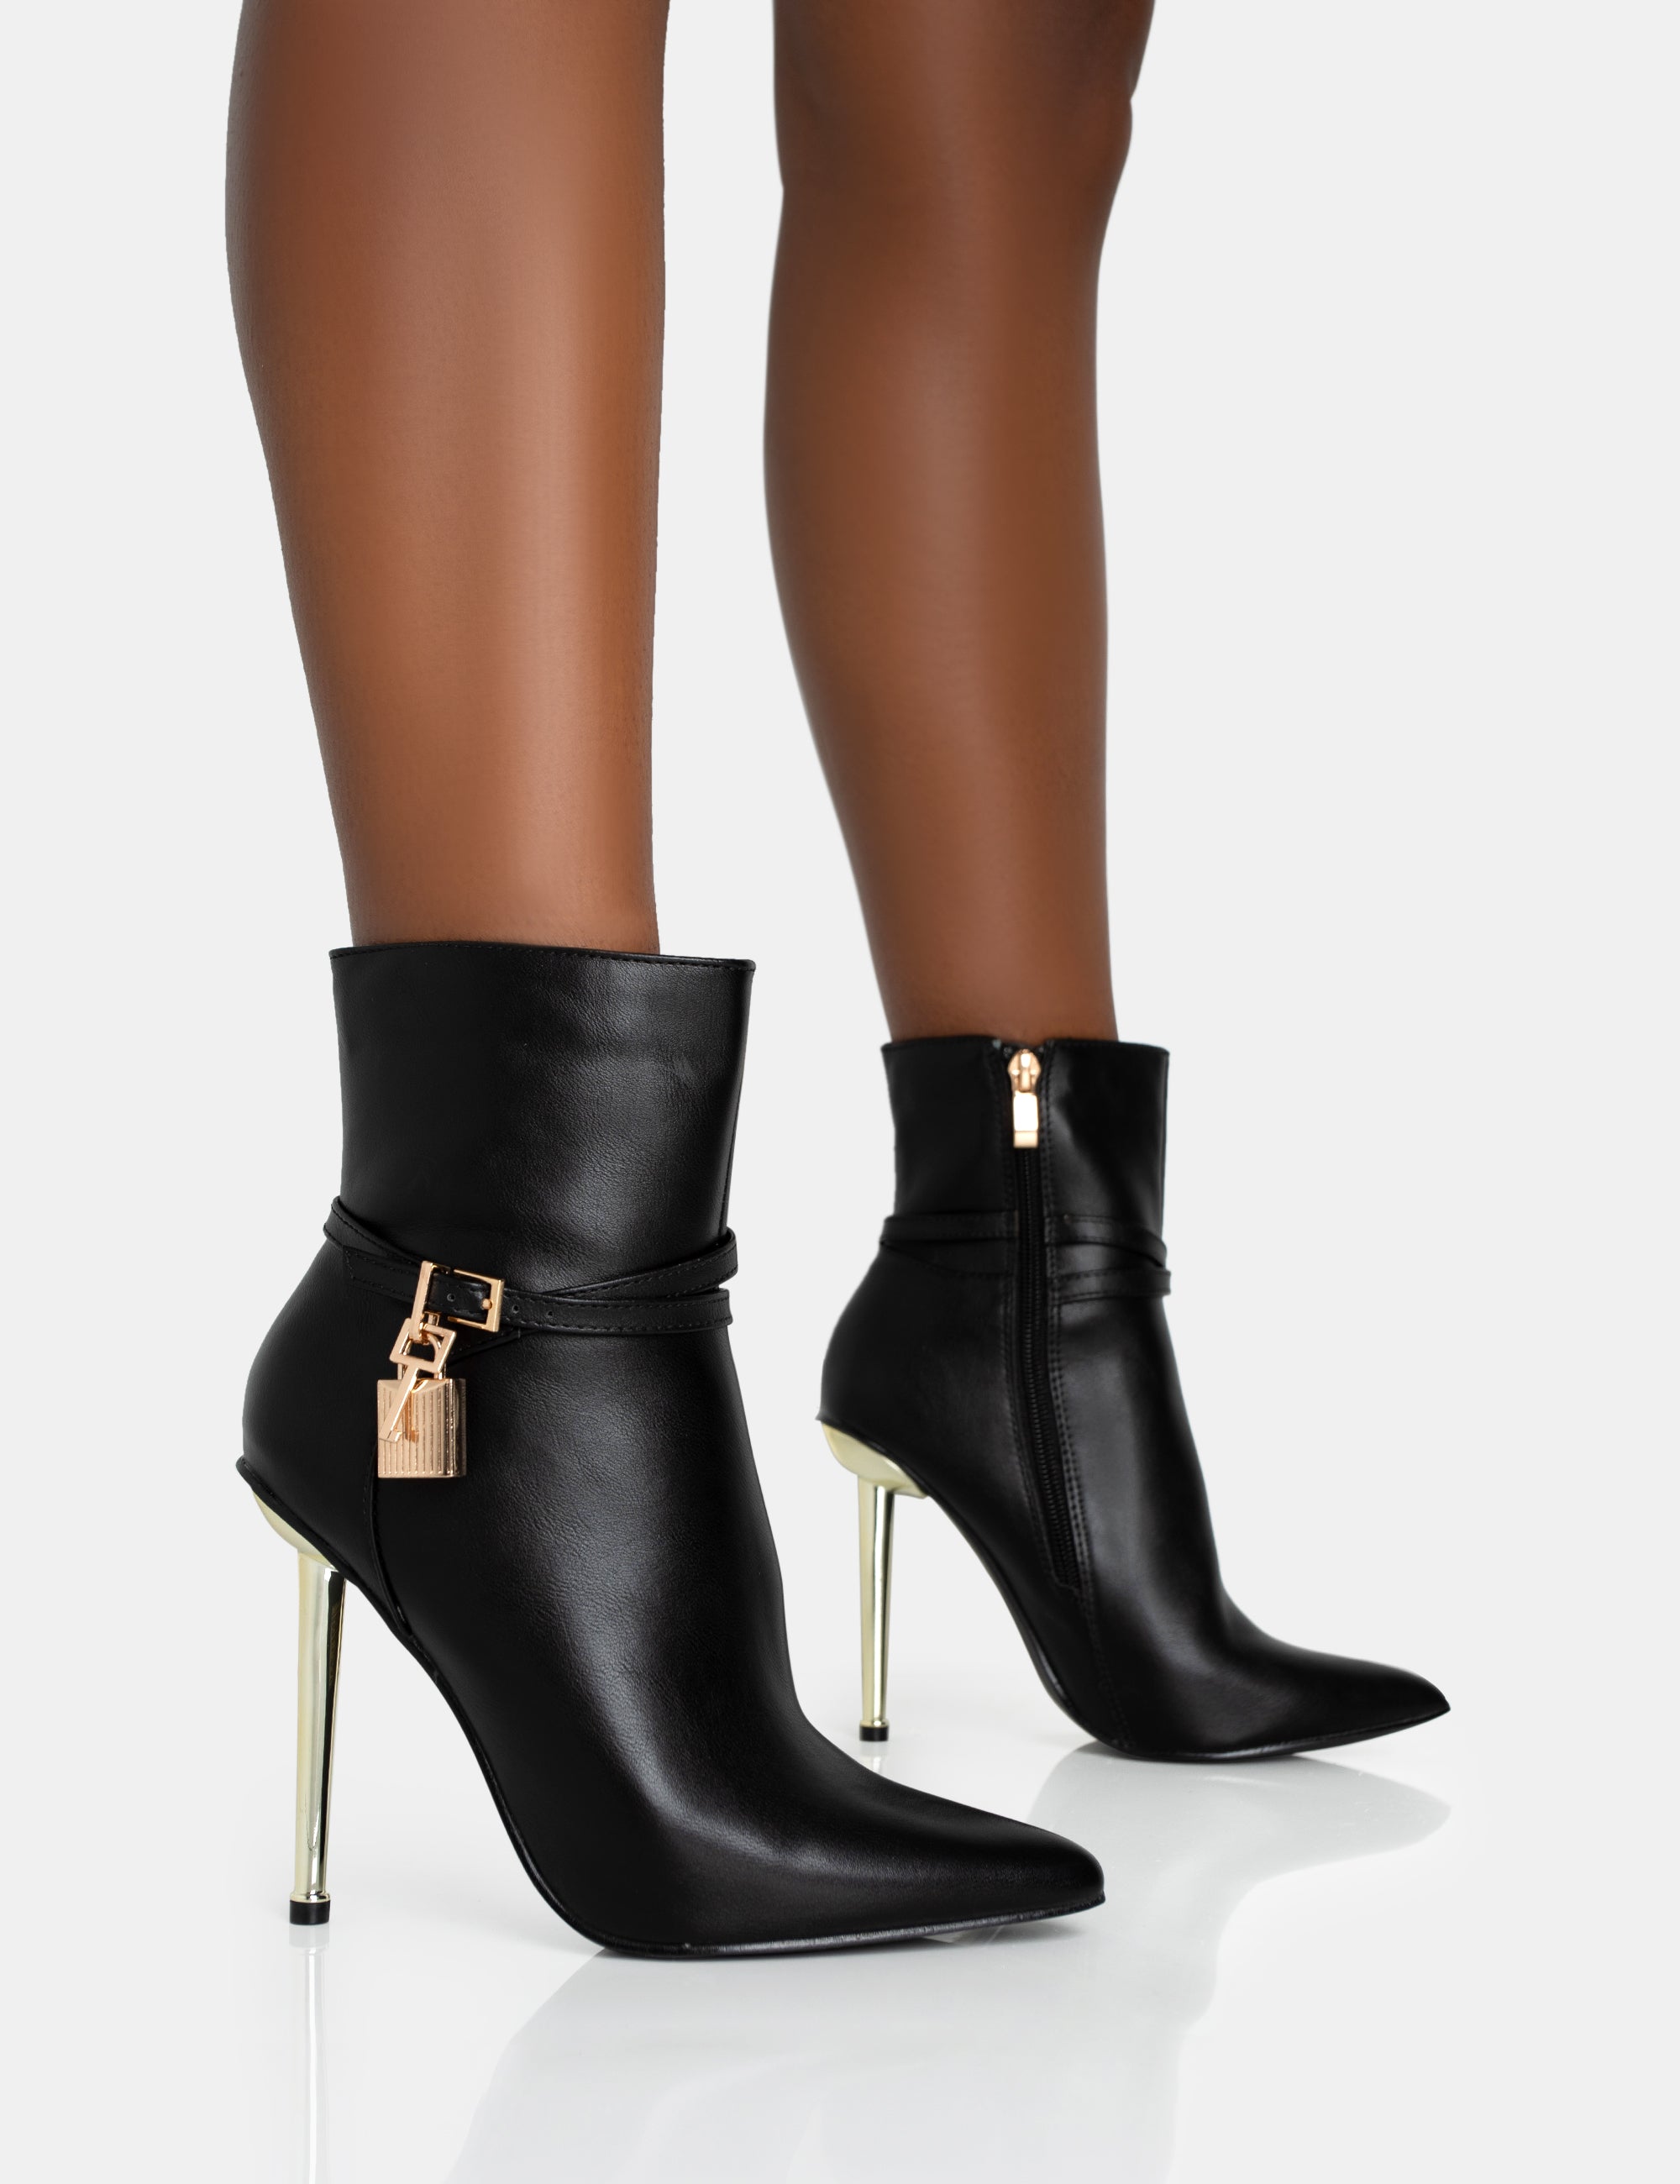 SOFT LEATHER HIGH HEELED ANKLE BOOTS - Black | ZARA United States